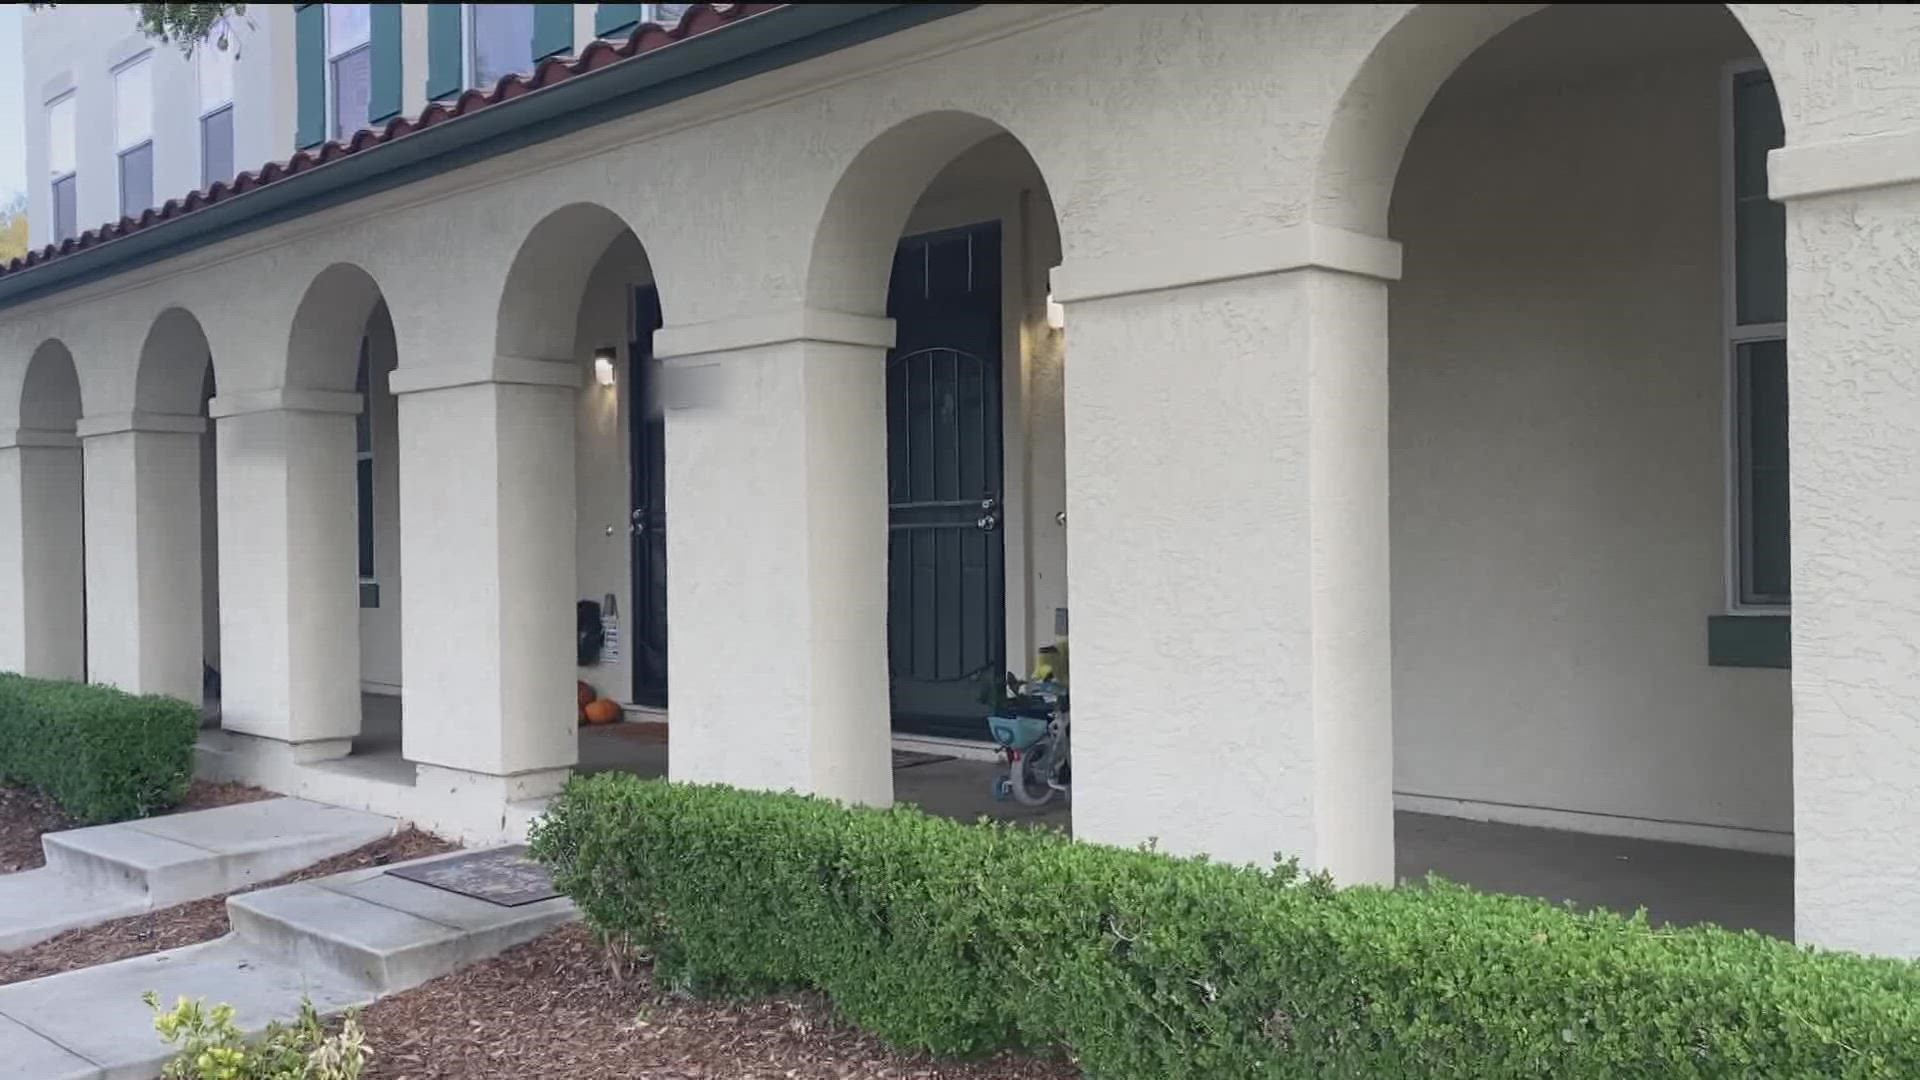 Neighbors in a Liberty Housing neighborhood are breathing a sigh of relief as a group of vagrants has vacated a home in the area.